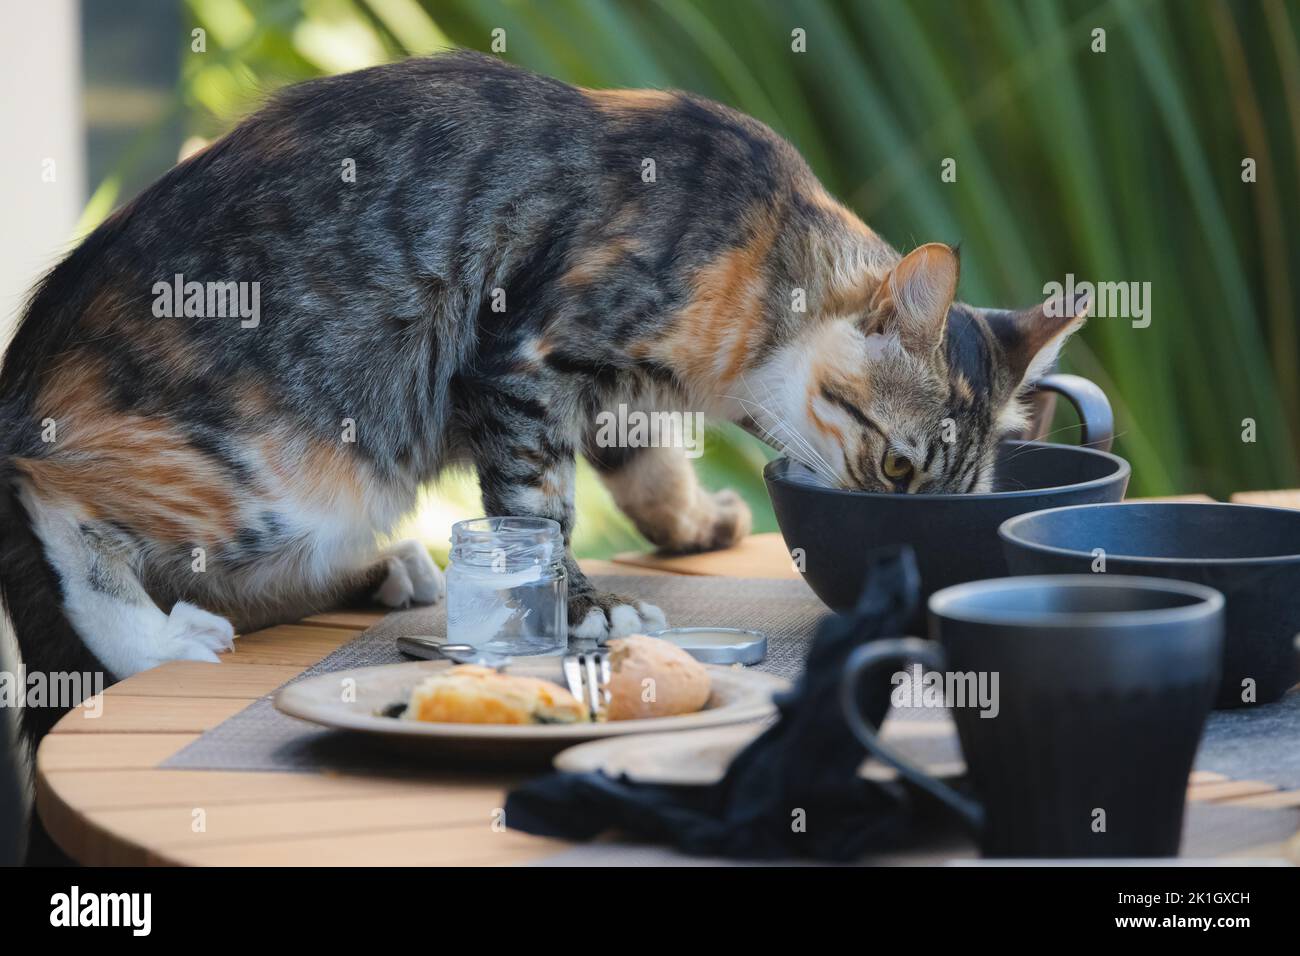 A mischievous and naughty tabby cat scavenges for food from leftover dishes on an outdoor breakfast table on the Greek island of Santorini, Greece. Stock Photo